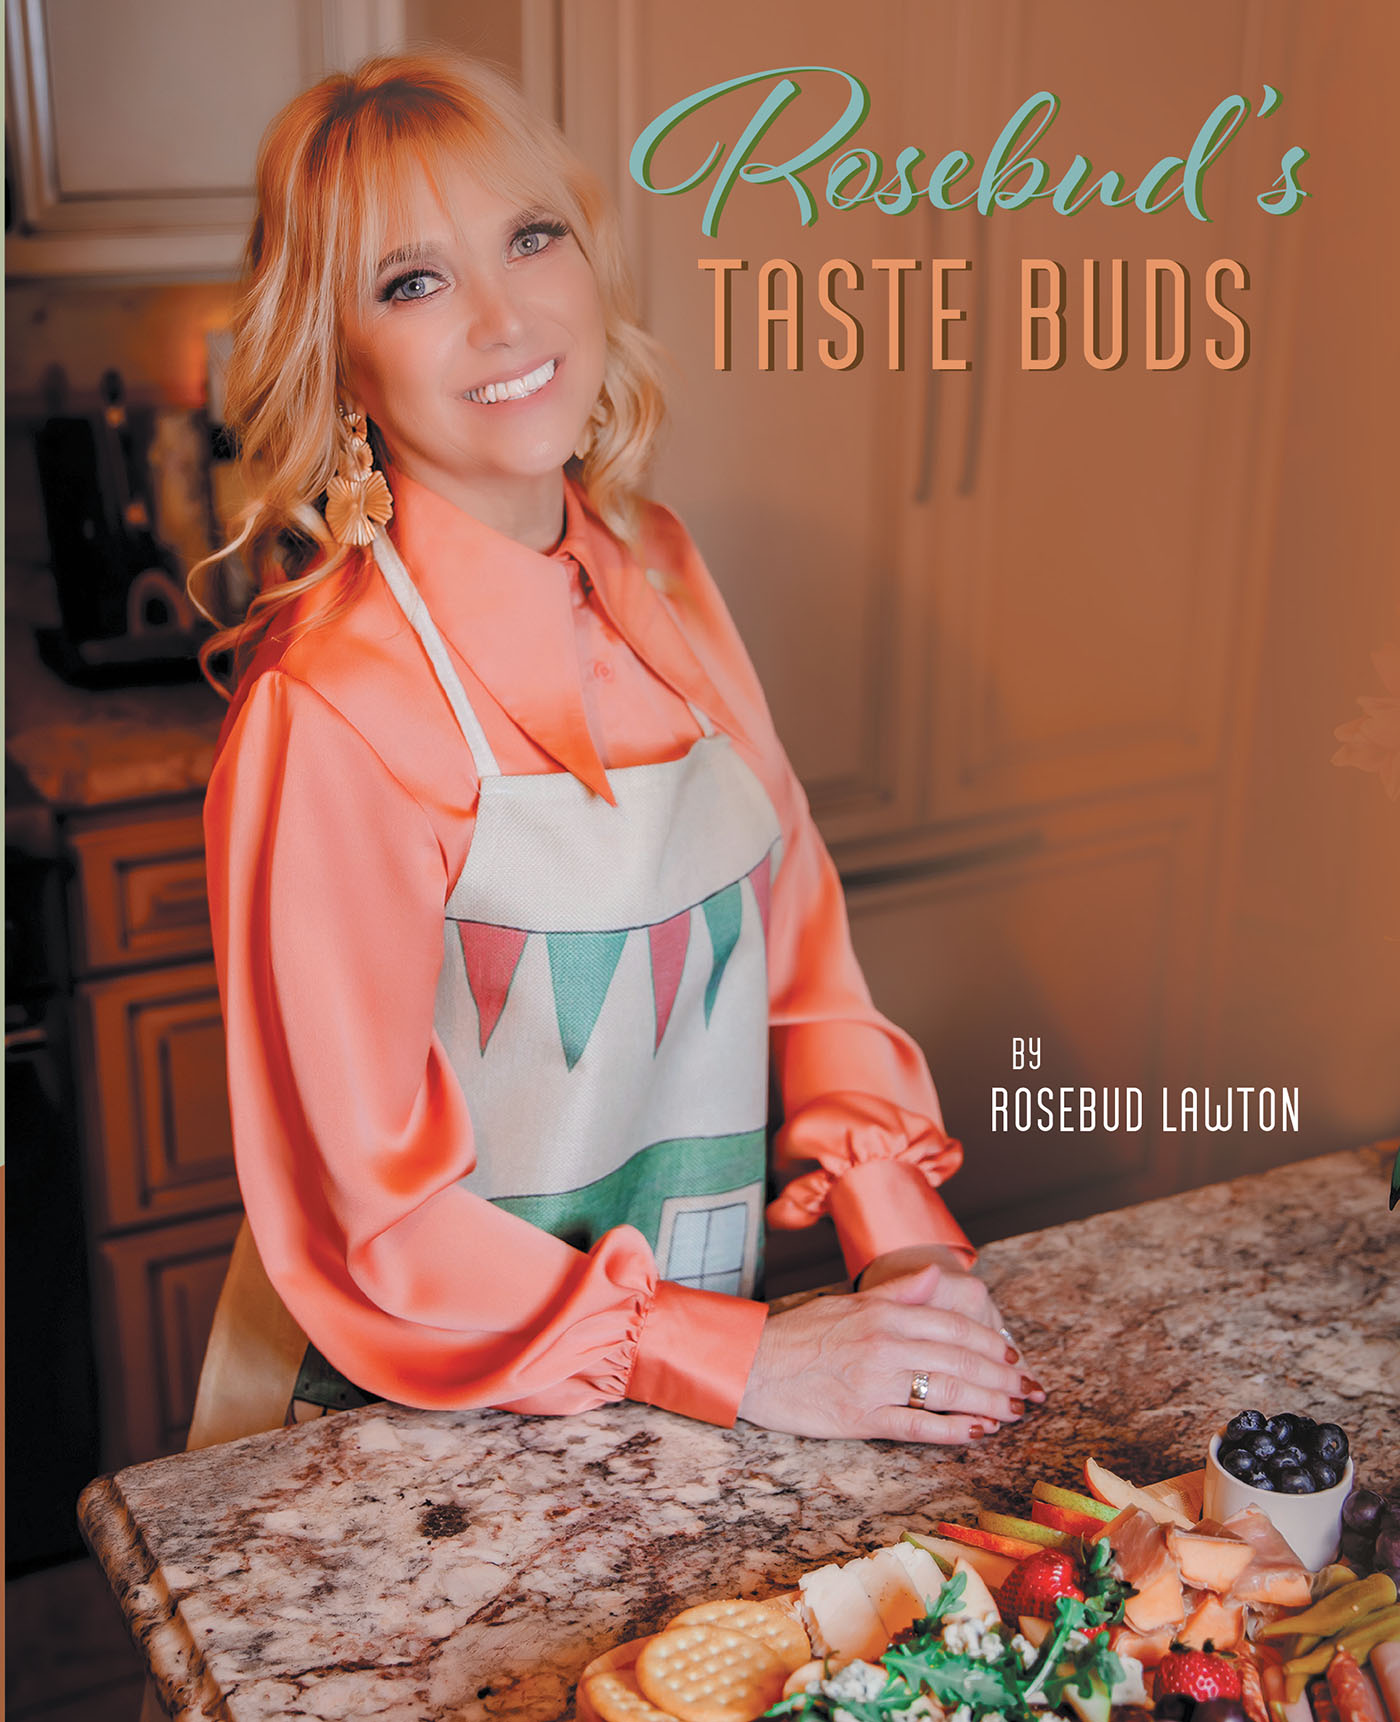 Author Rosebud Lawton’s New Book, "Rosebud's Taste Buds," is the Perfect Tool for Chefs of Any Experience Level to Master Their Way Around a Kitchen and Impress Any Guest